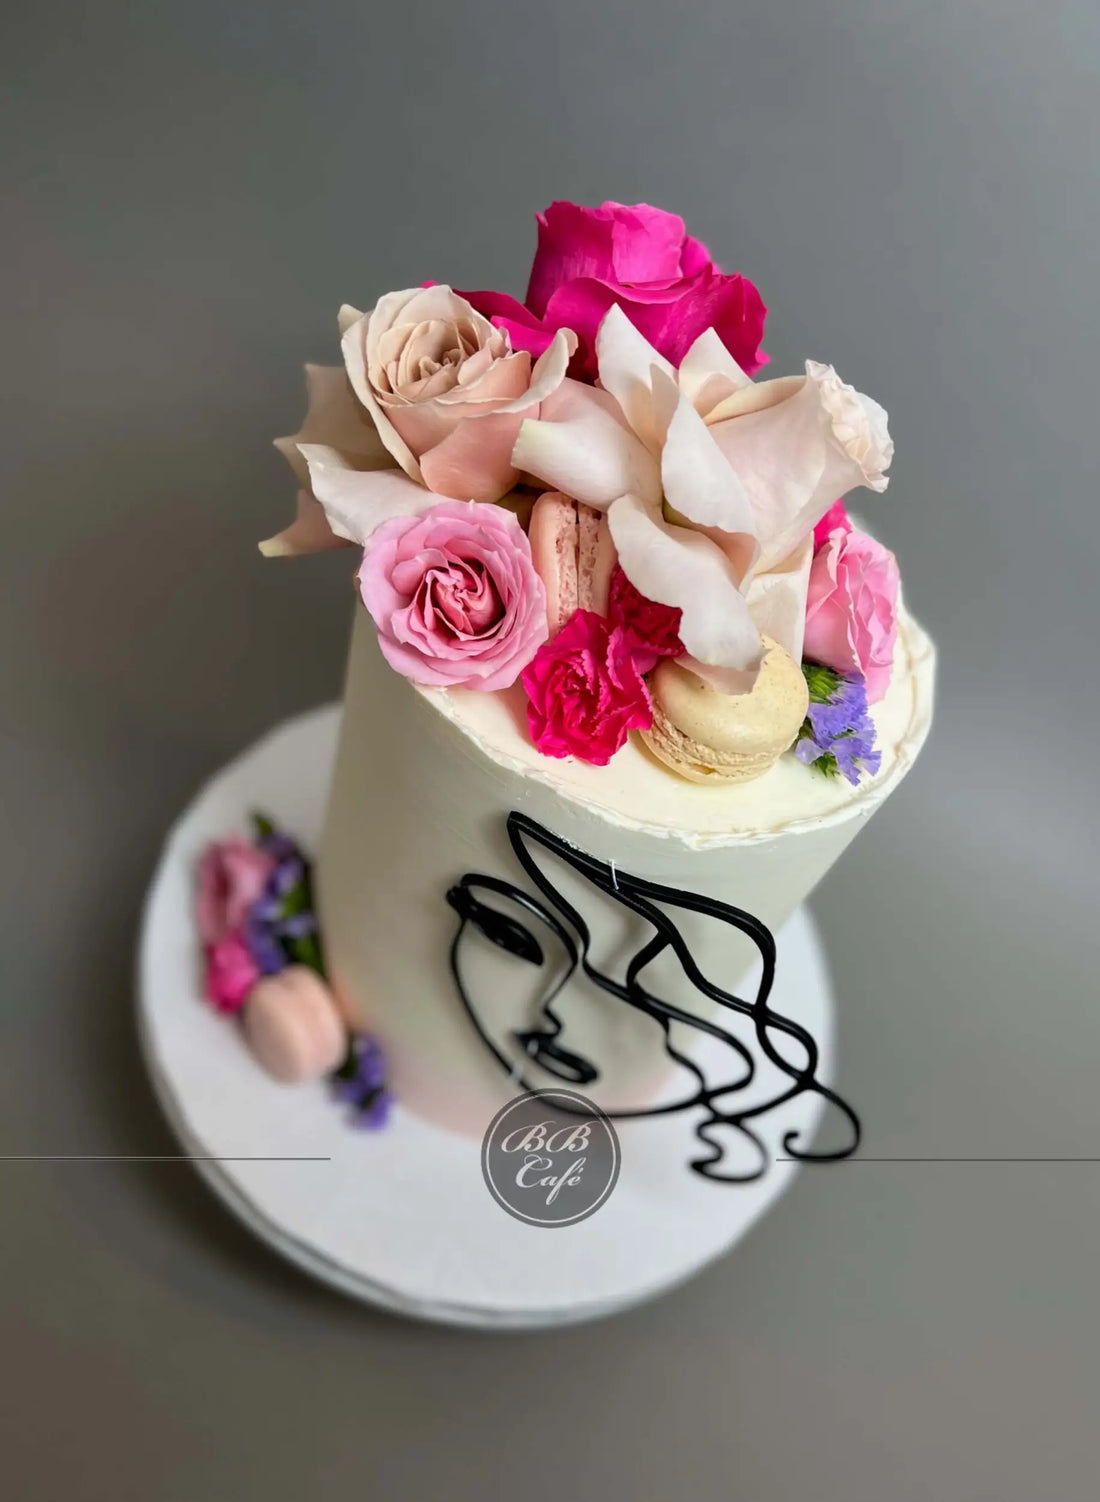 Abstract face and florals on buttercream - custom cake